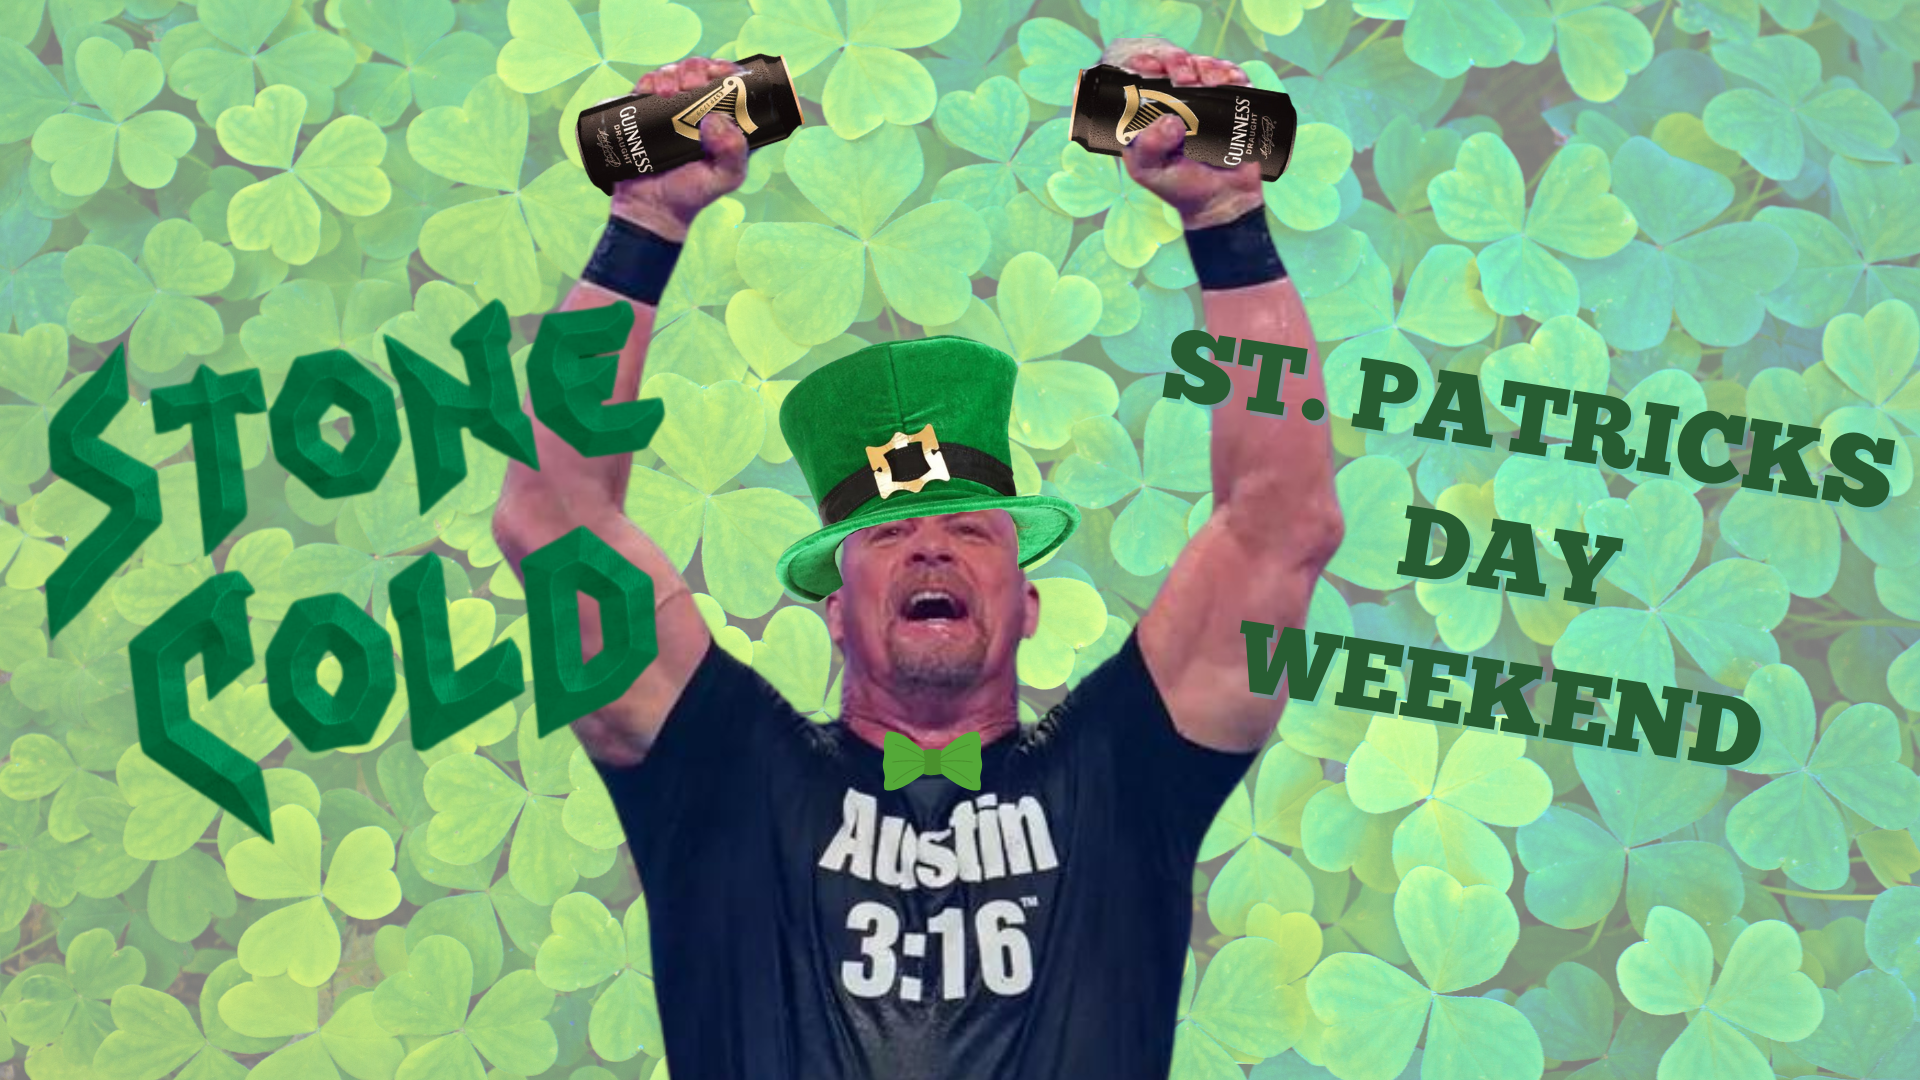 Stone Cold St. Patrick's Day Weekend